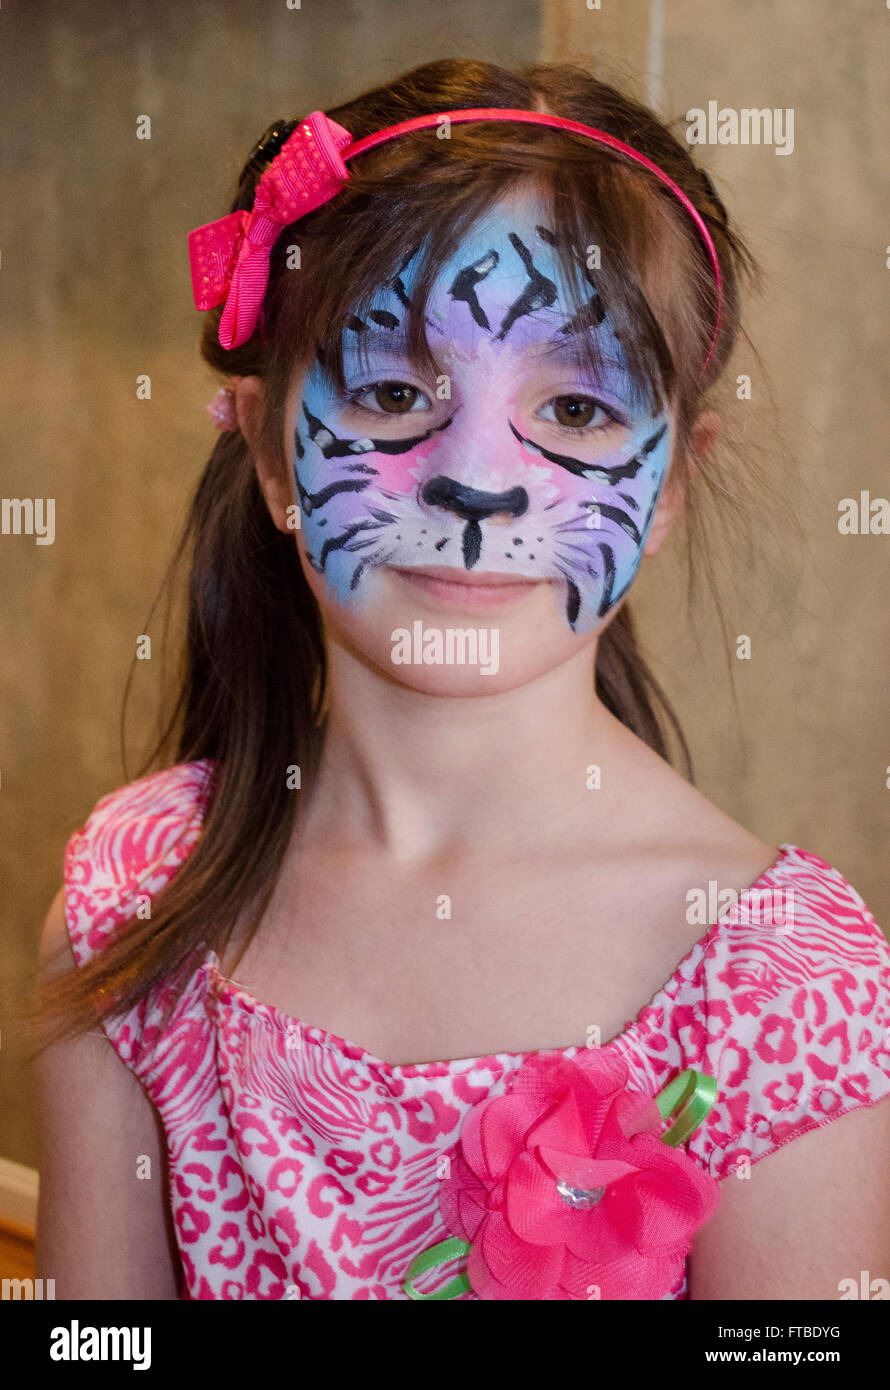 Young girl wearing animal face paint from party Stock Photo